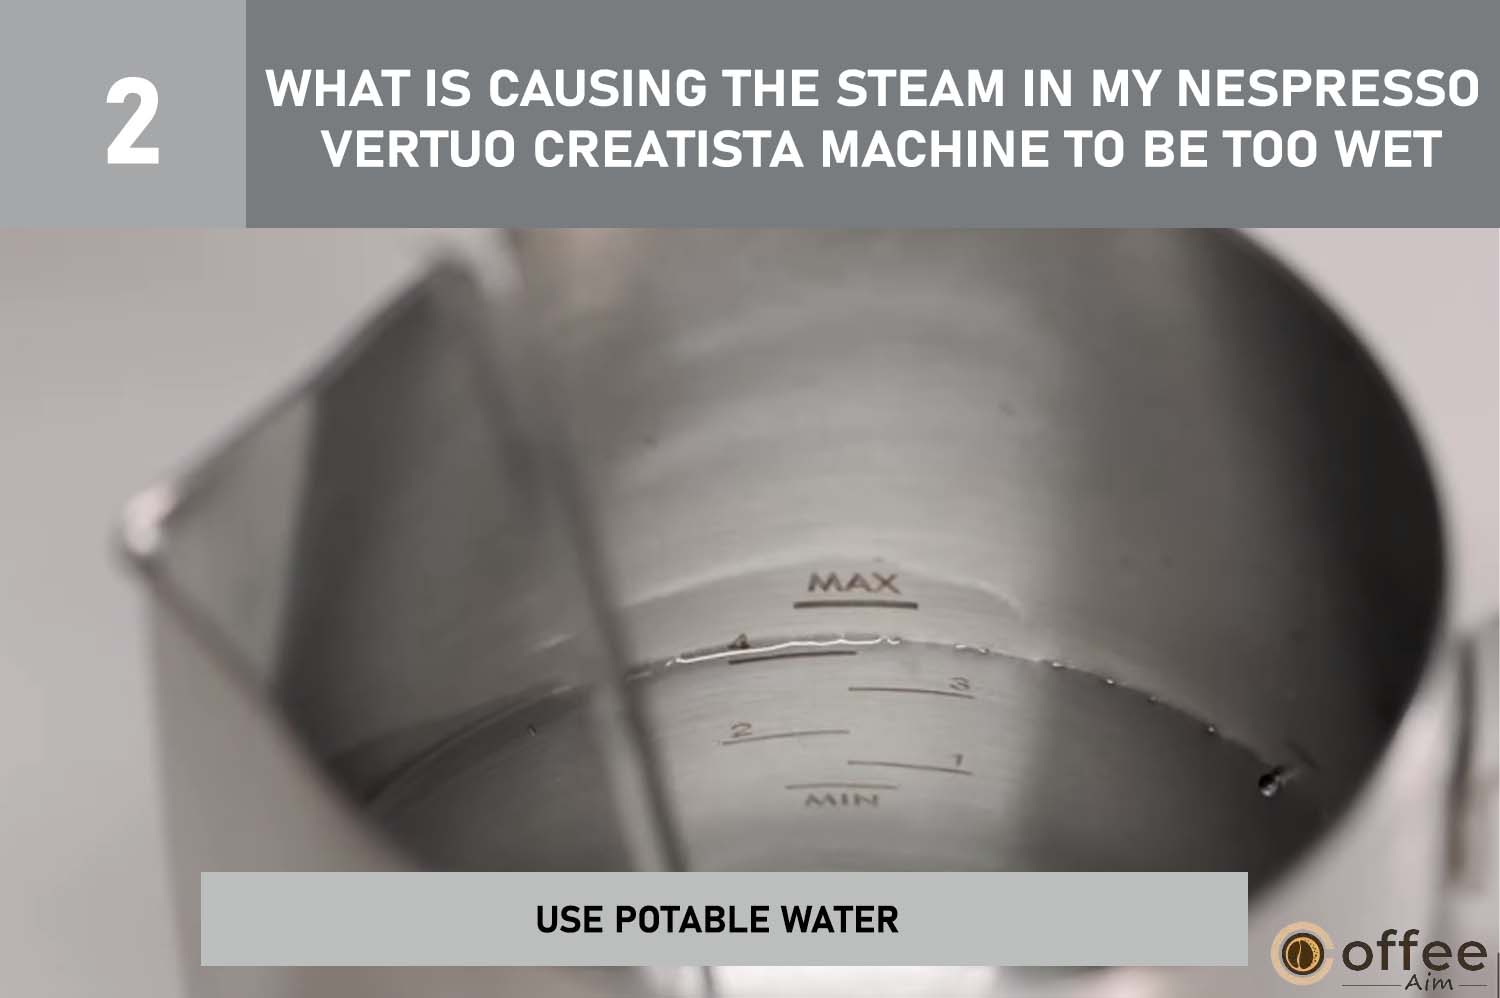 
The image illustrates using clean water for Nespresso Vertuo Creatista. Prevents excess steam moisture. Follow for effective fixes in article.